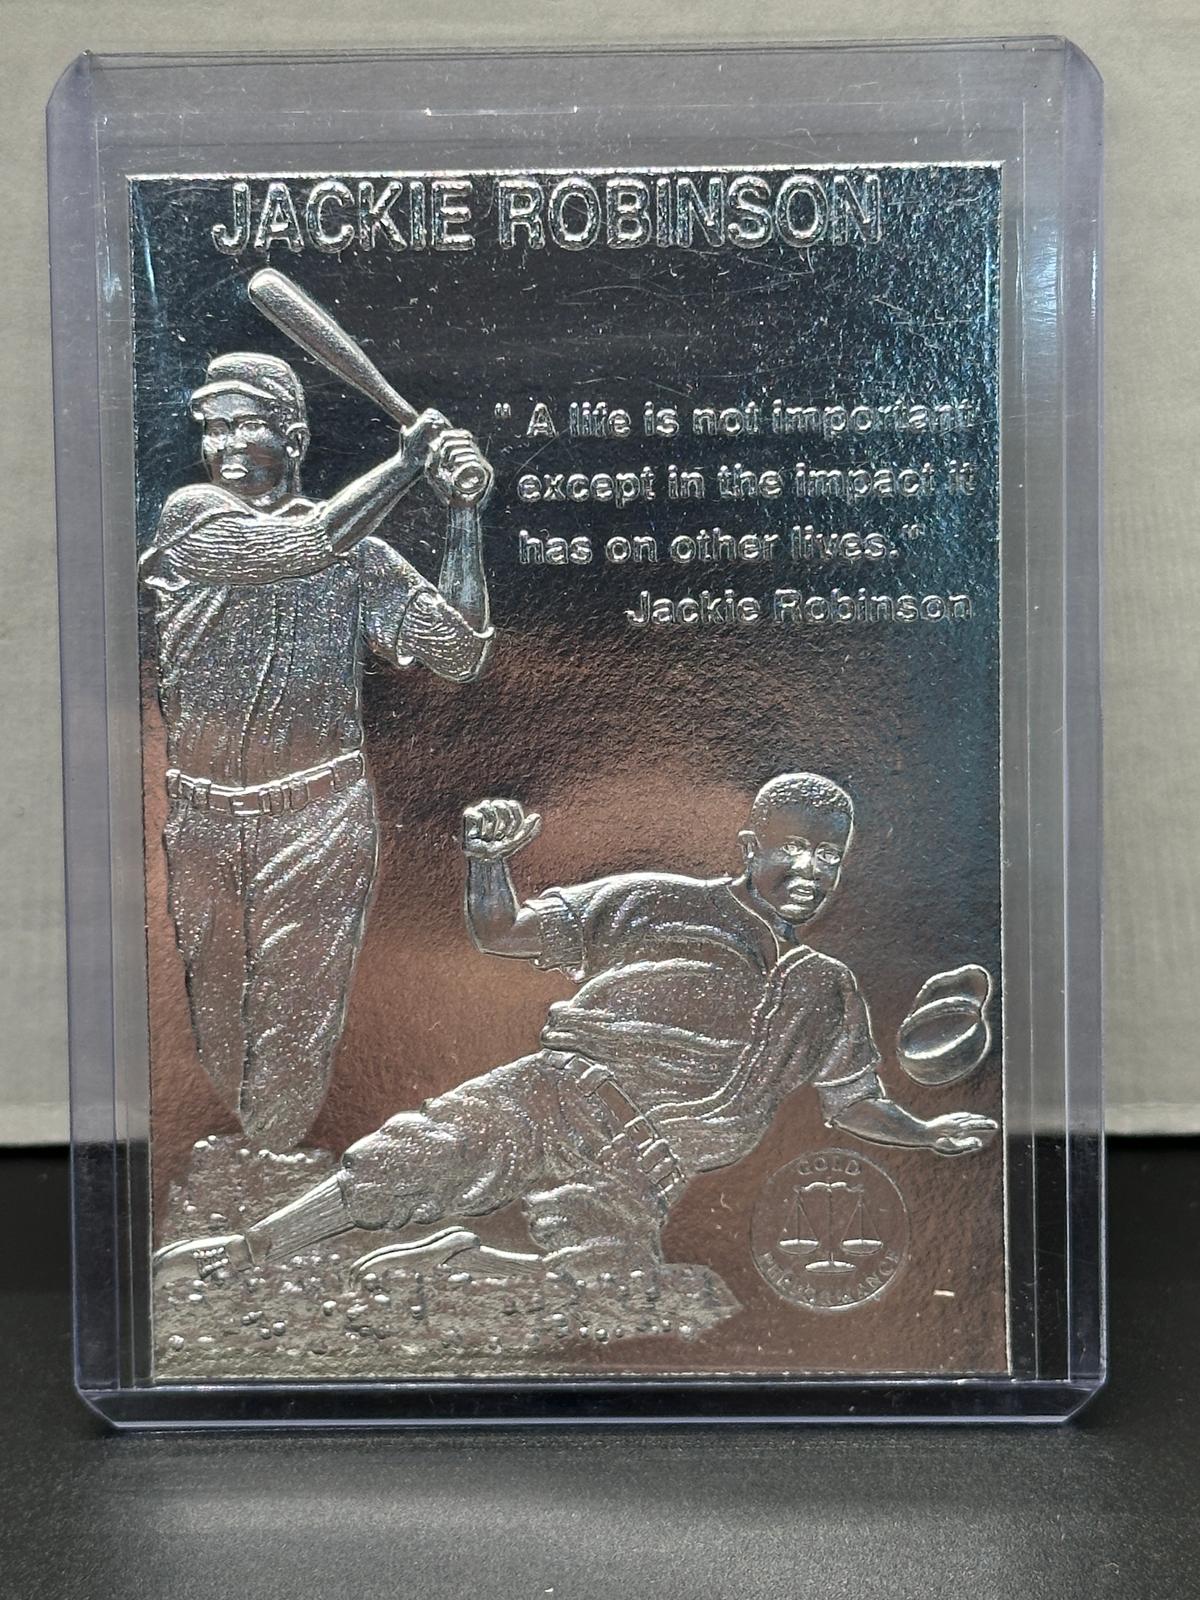 Jackie Robinson 50th Anniversary Silver Card Limited Edition Serial #4145